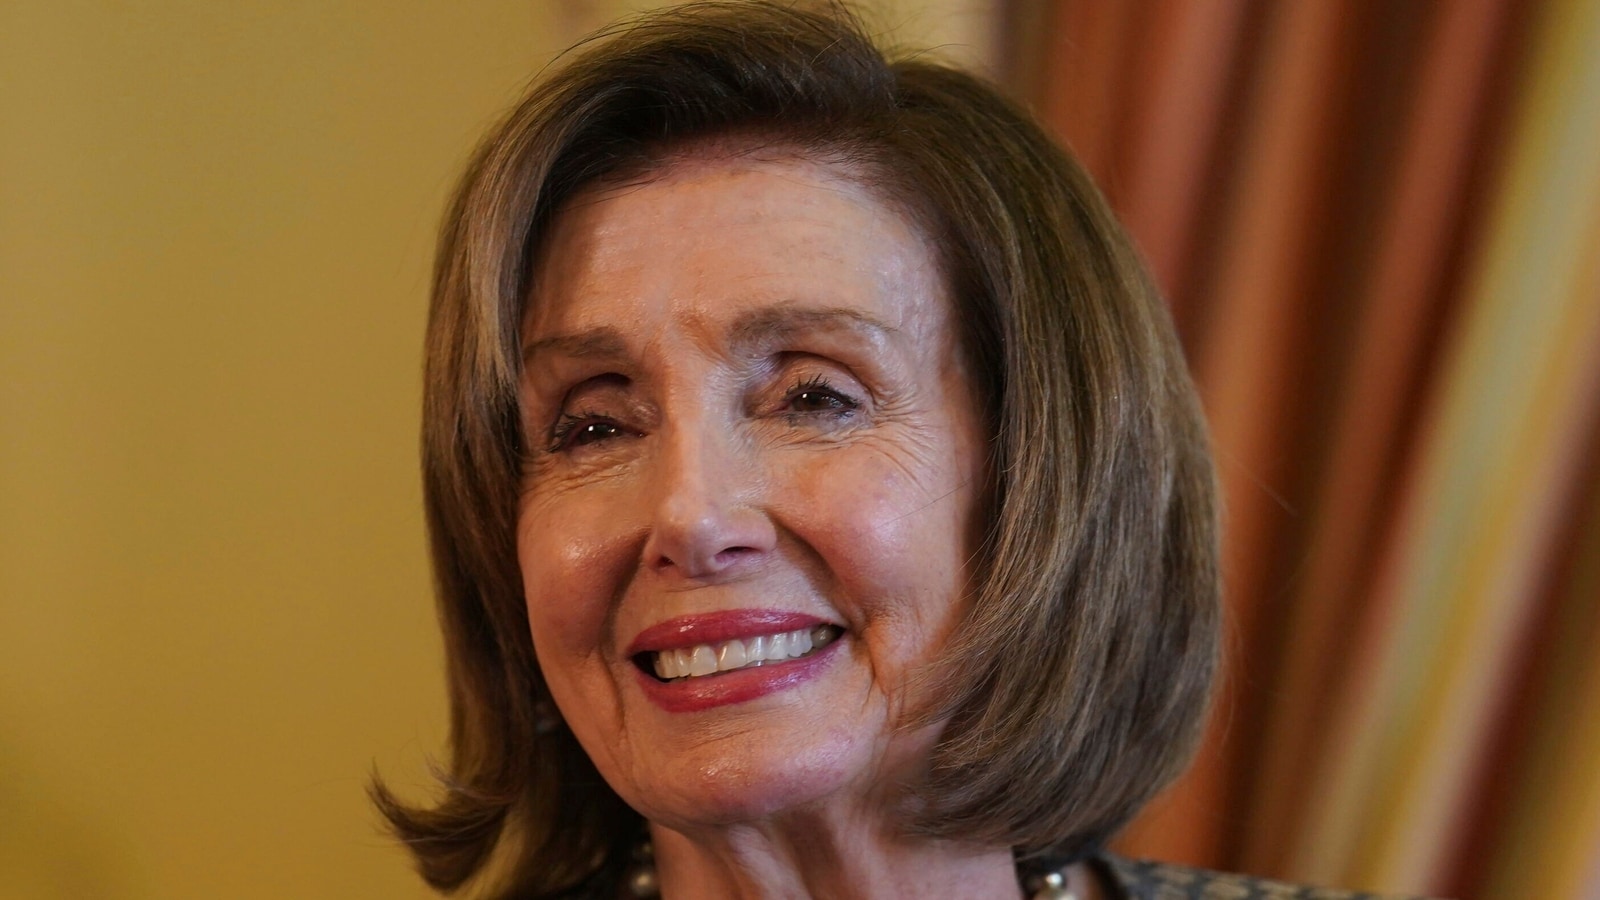 Nancy Pelosi admits she ‘did not have any accountability’ for lack of security at Capitol on Jan 6: Watch